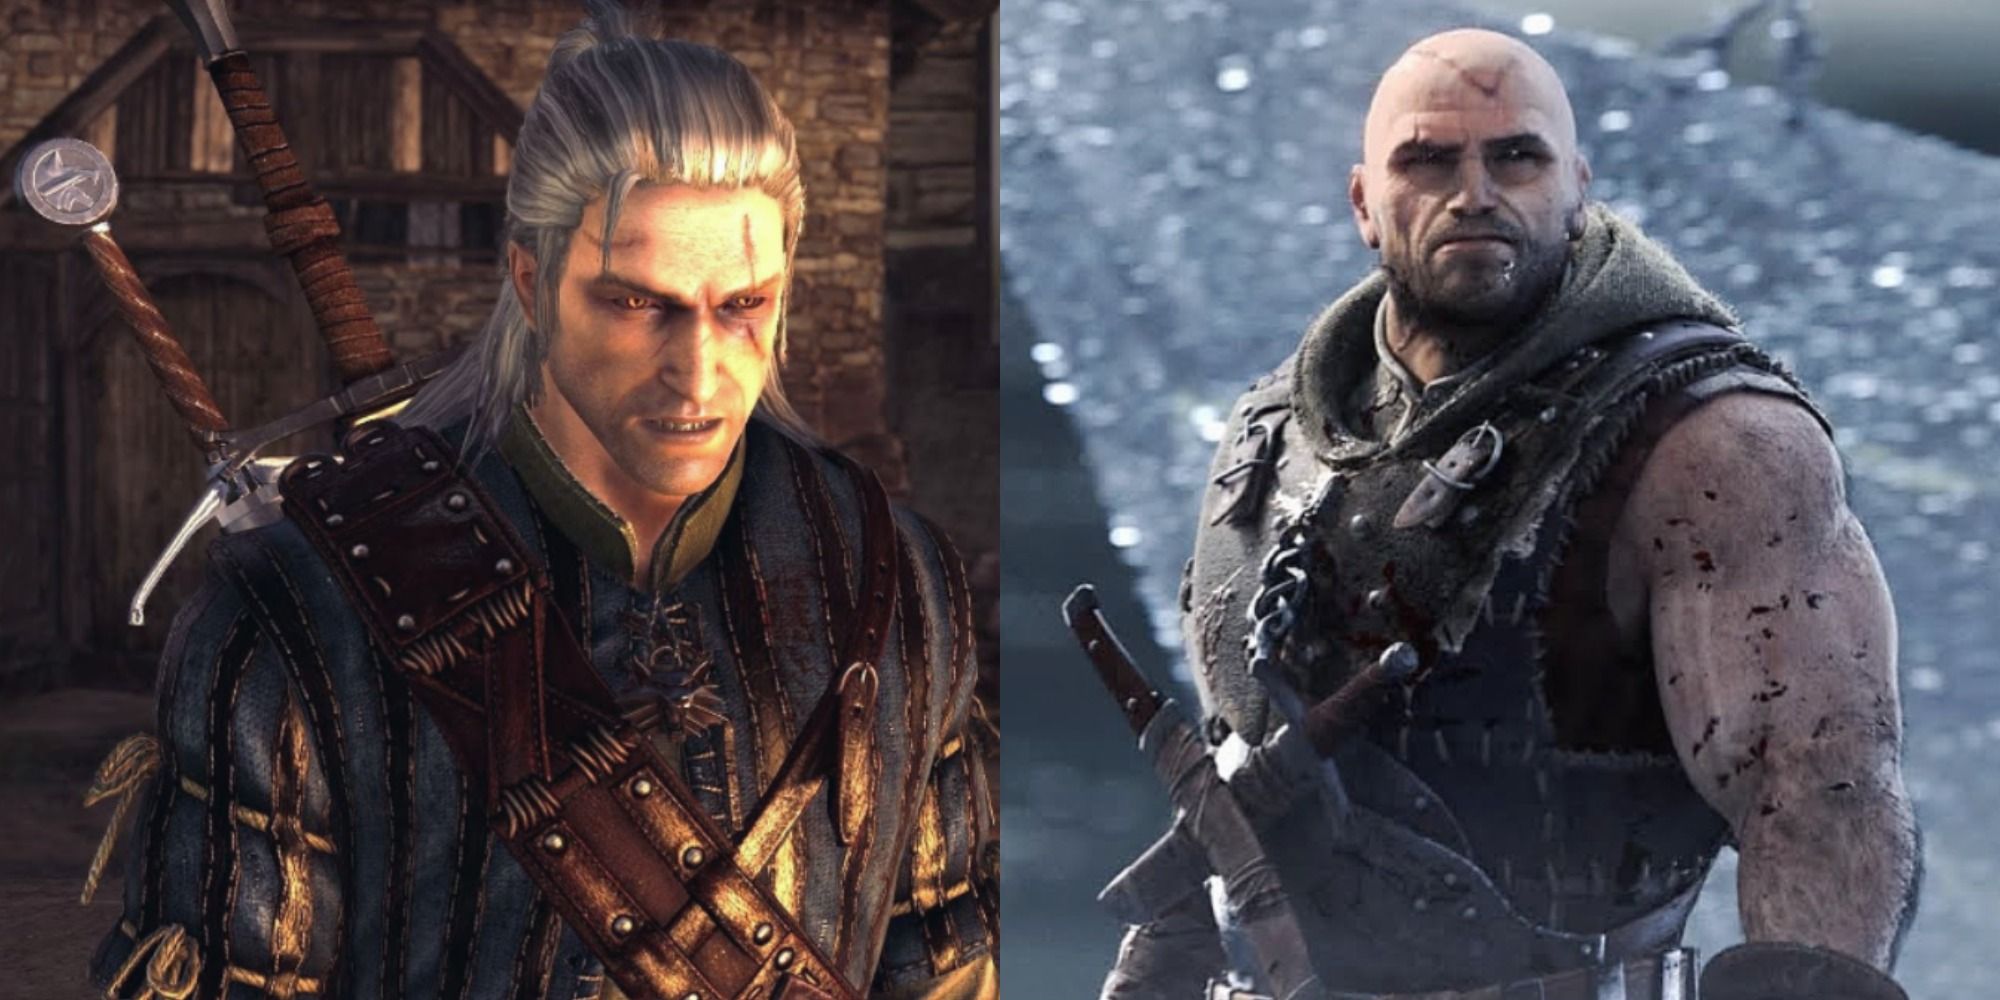 The Witcher 2 Geralt And Letho